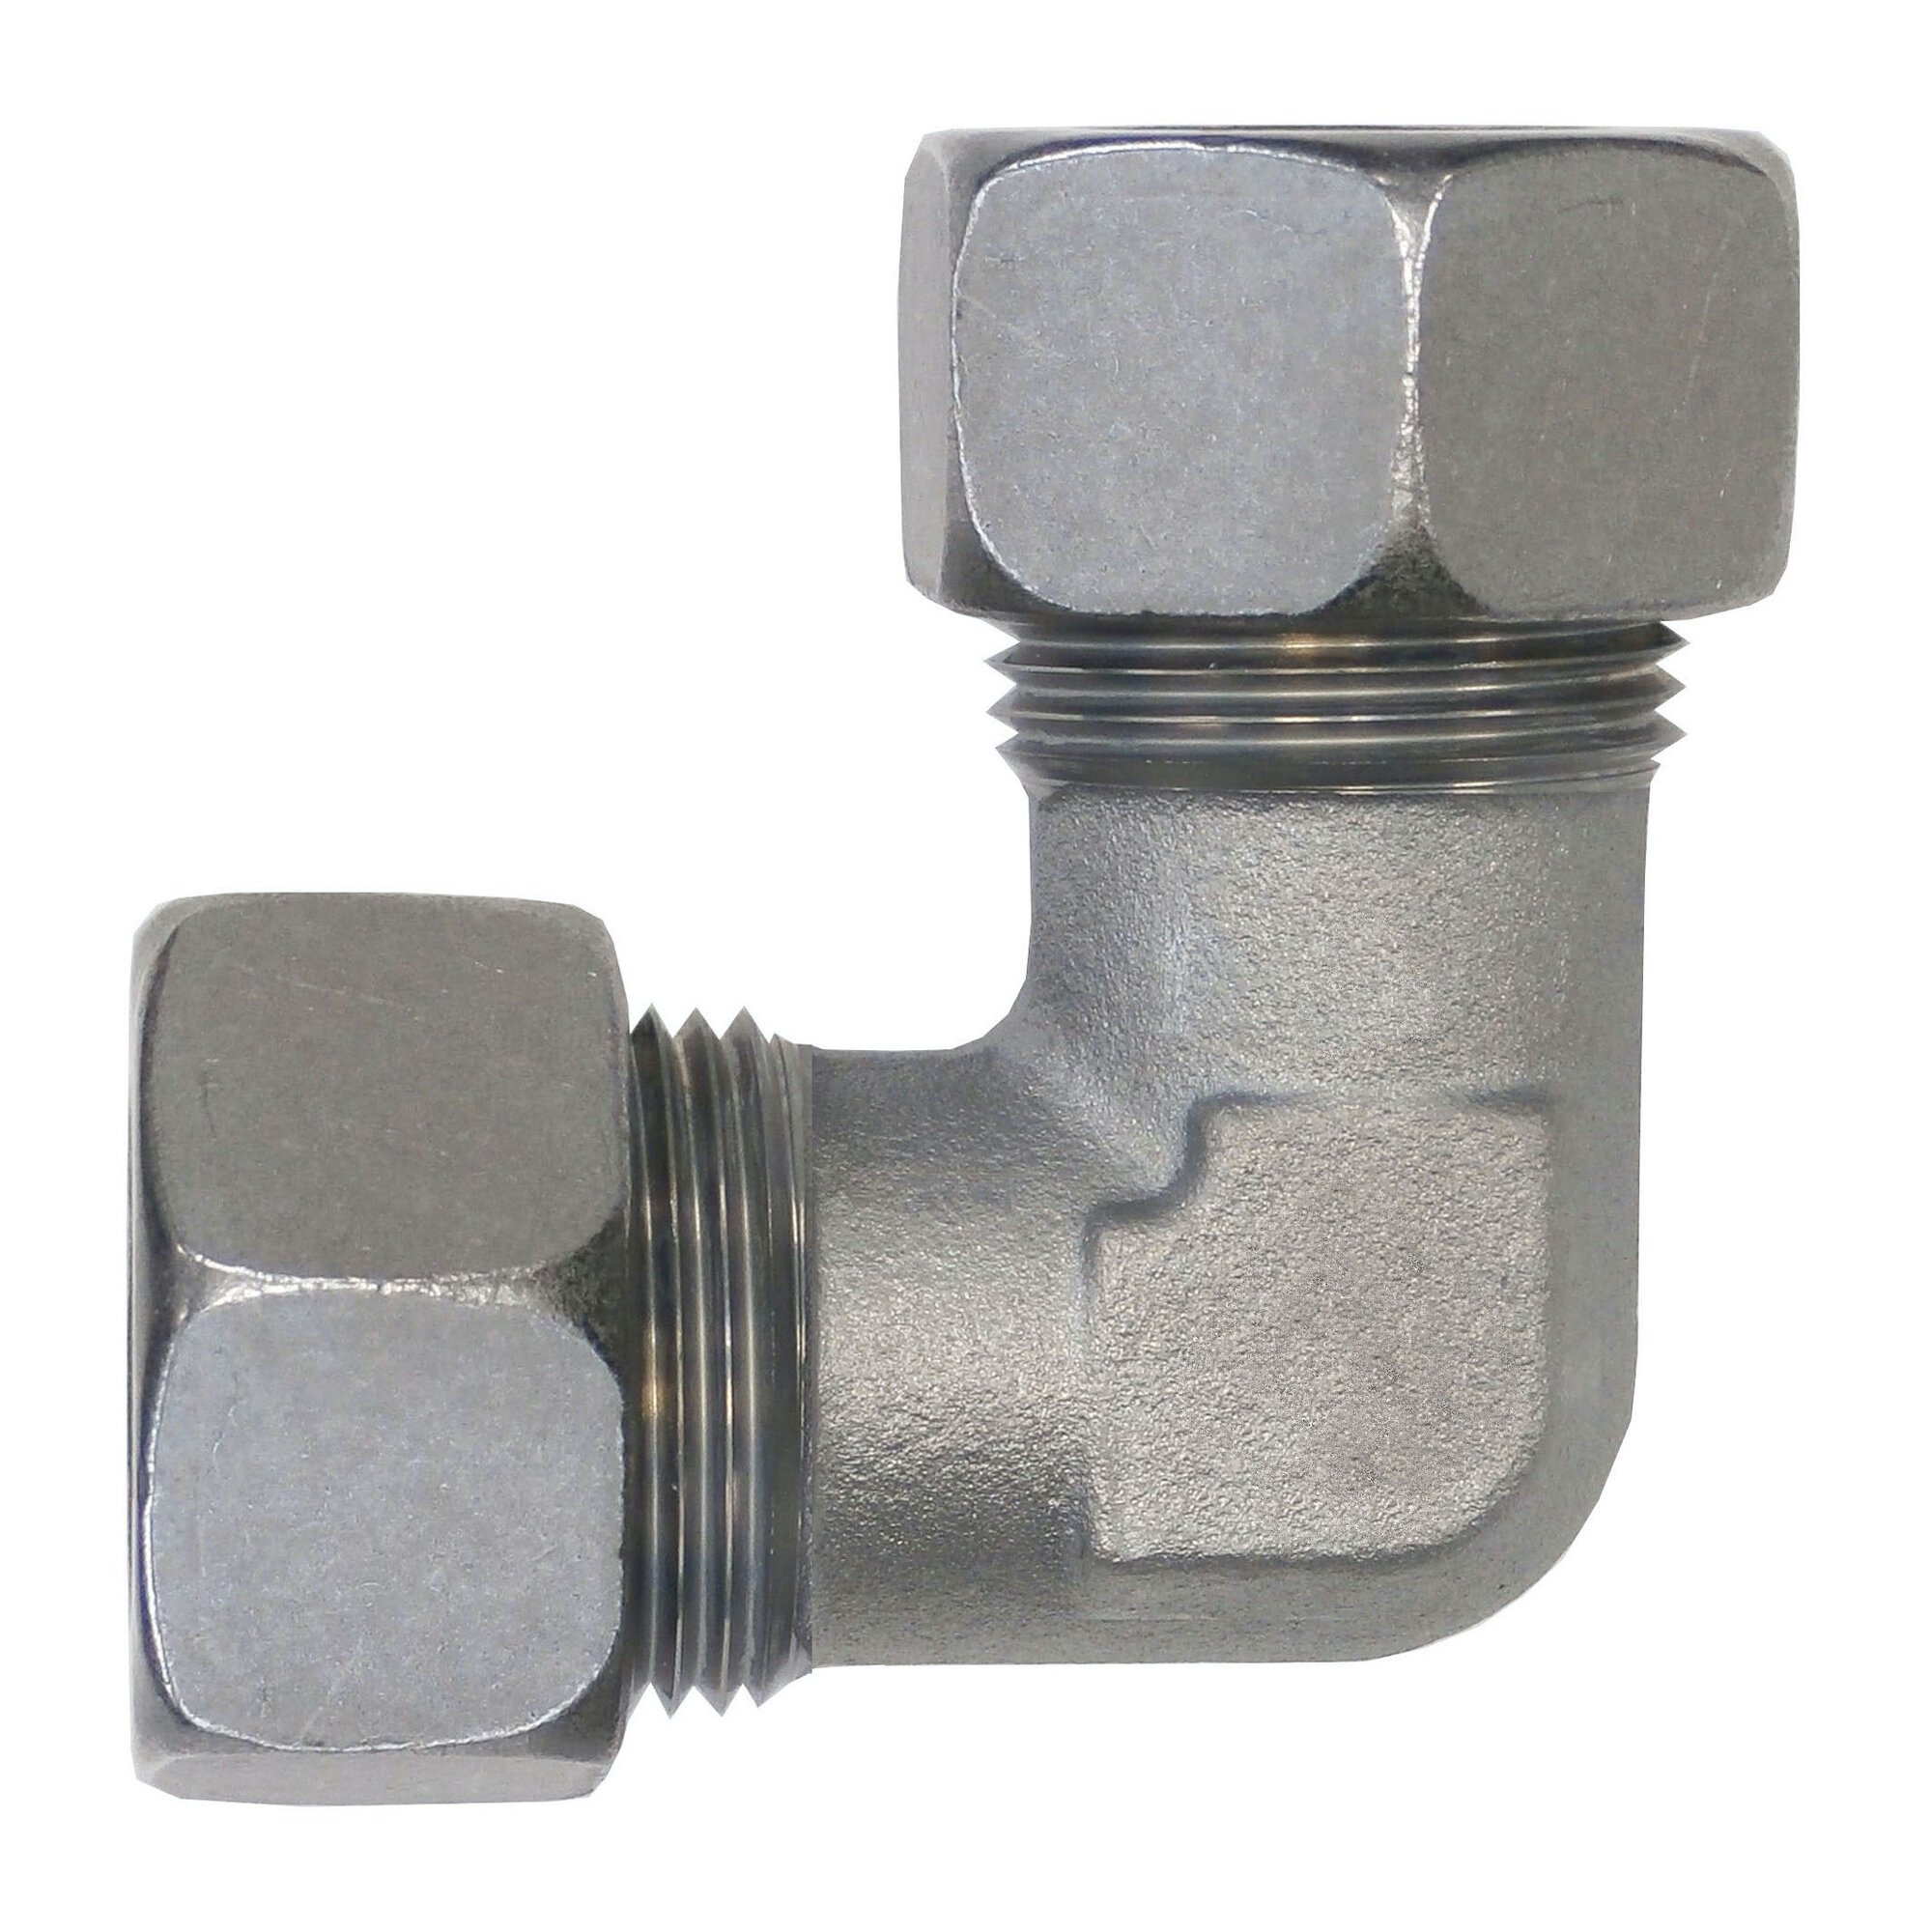 How and Where are Push-to-Connect Fittings Used